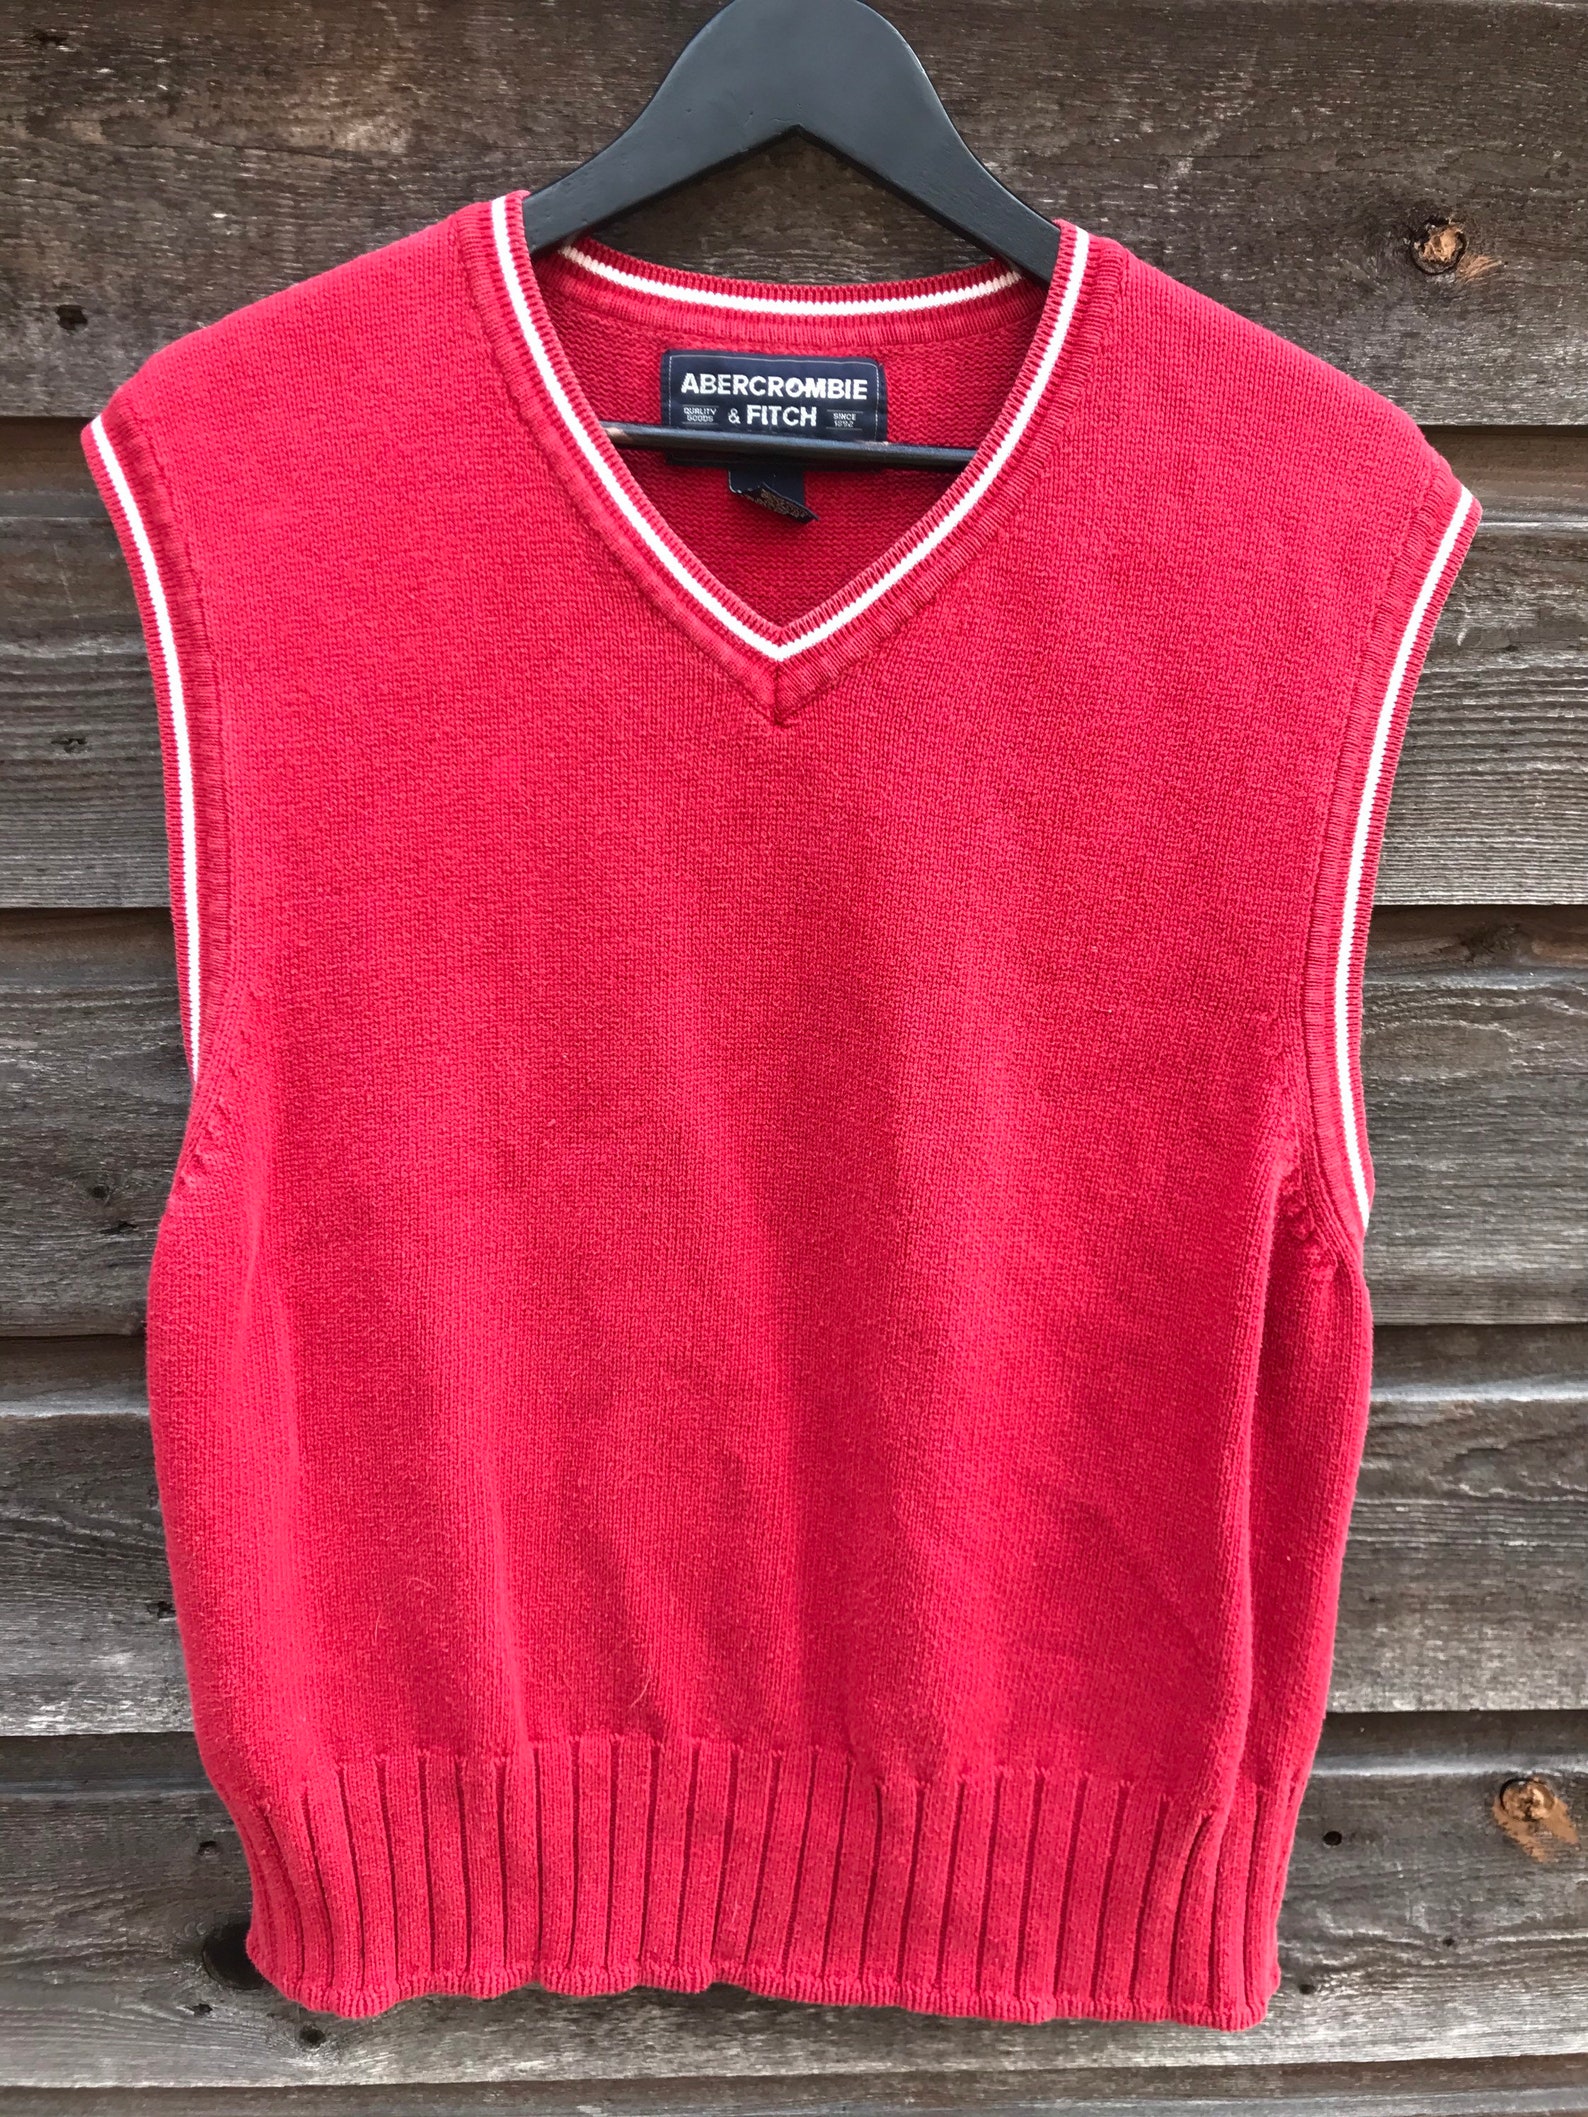 Vintage Abercrombie and Fitch Sweater Vest | Etsy